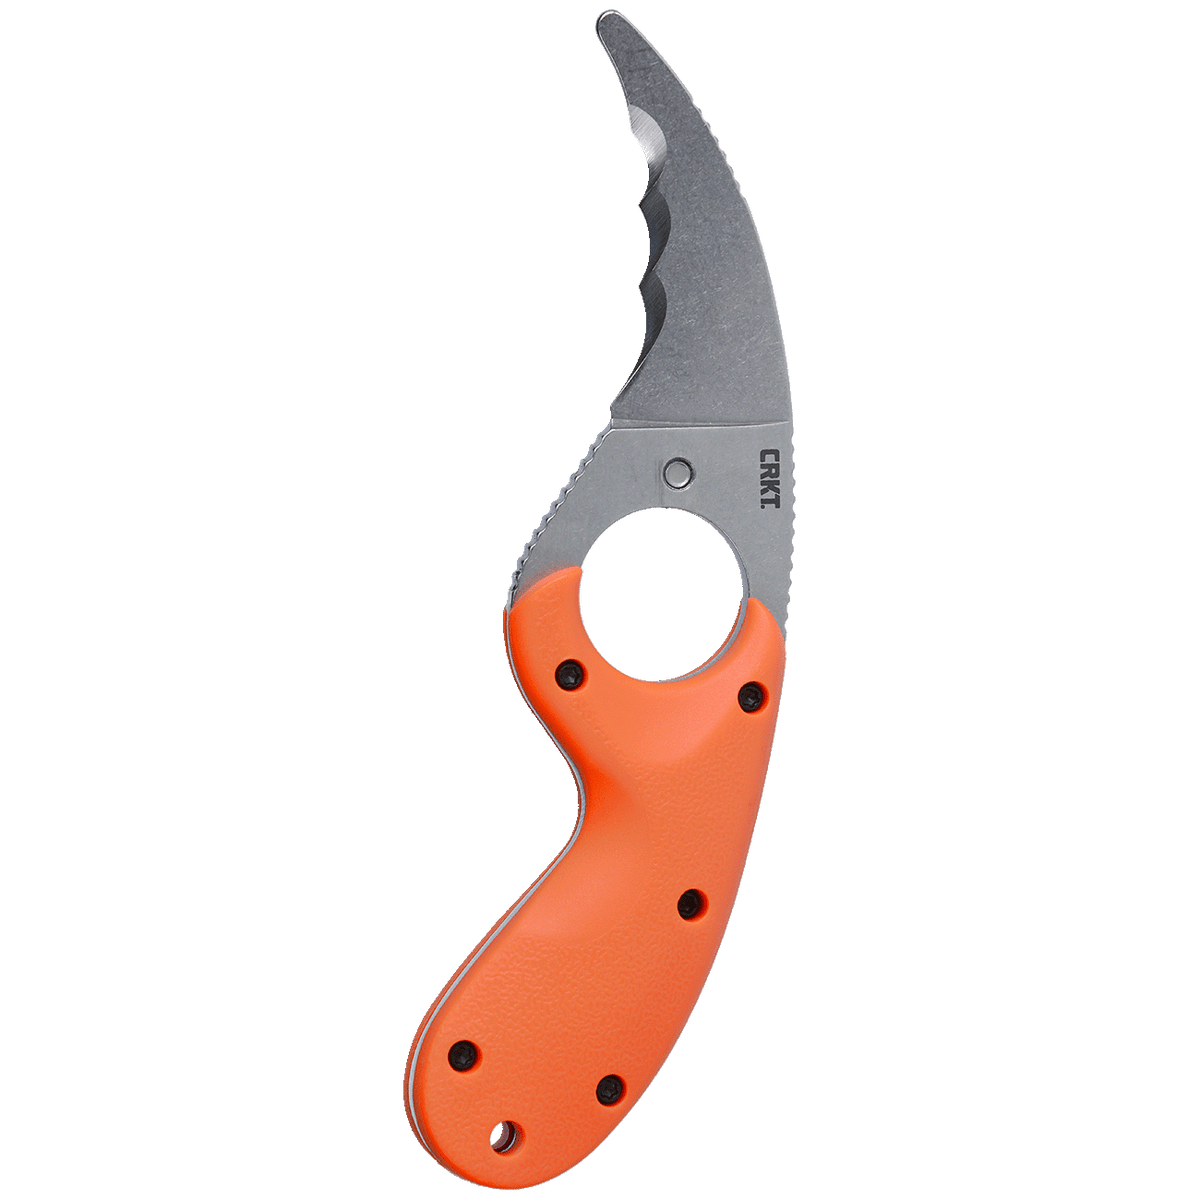 The CRKT Bear Claw knife is a fixed blade knife with an orange handle that stands out on a white background. Its durable construction includes corrosion-resistant steel, ensuring long-lasting performance.